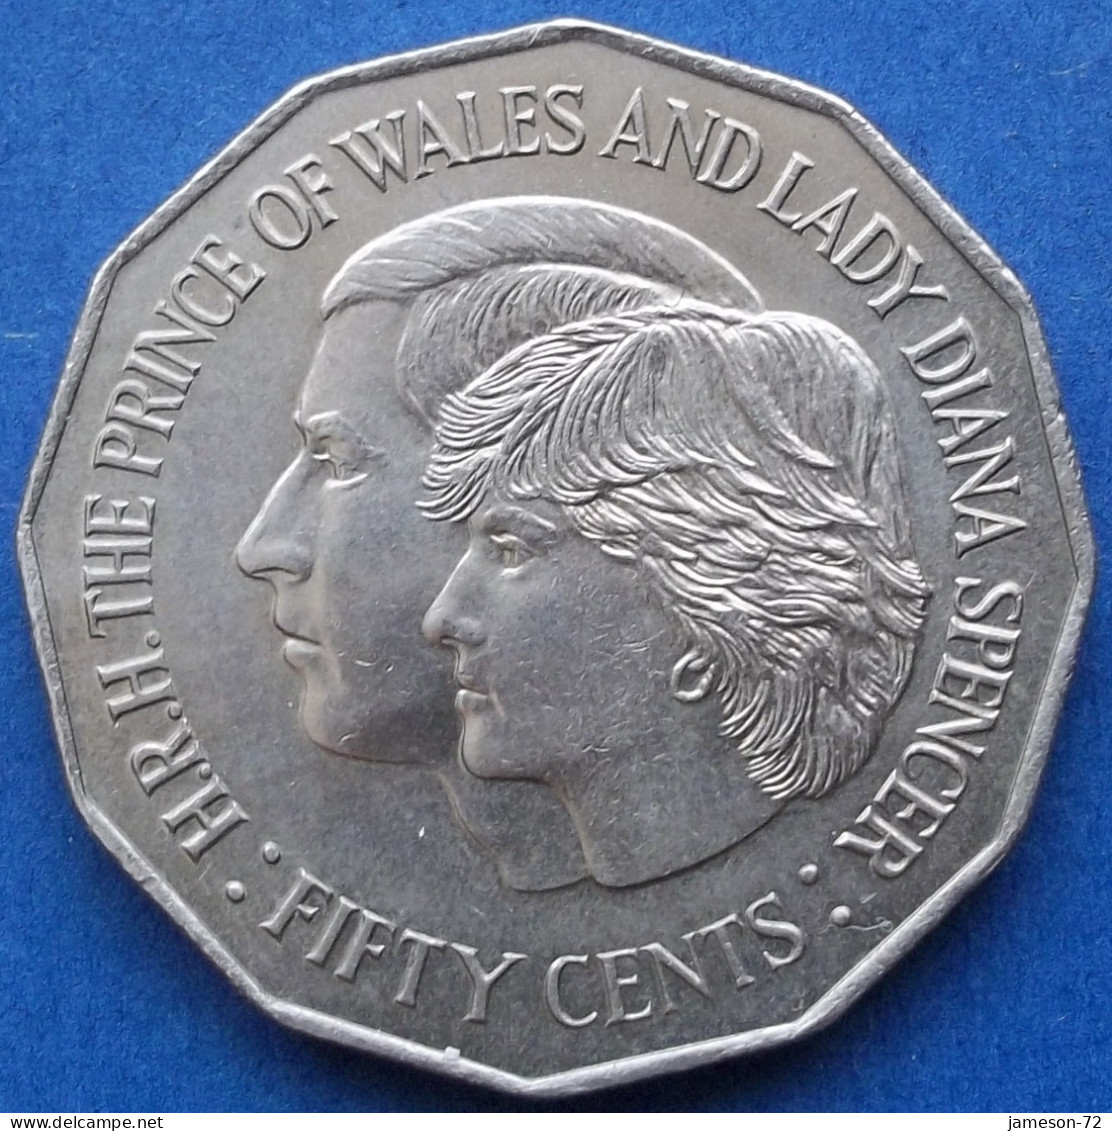 AUSTRALIA - 50 Cents 1981 "Wedding Of Prince Charles And Lady Diana" KM# 72 - Edelweiss Coins - 50 Cents